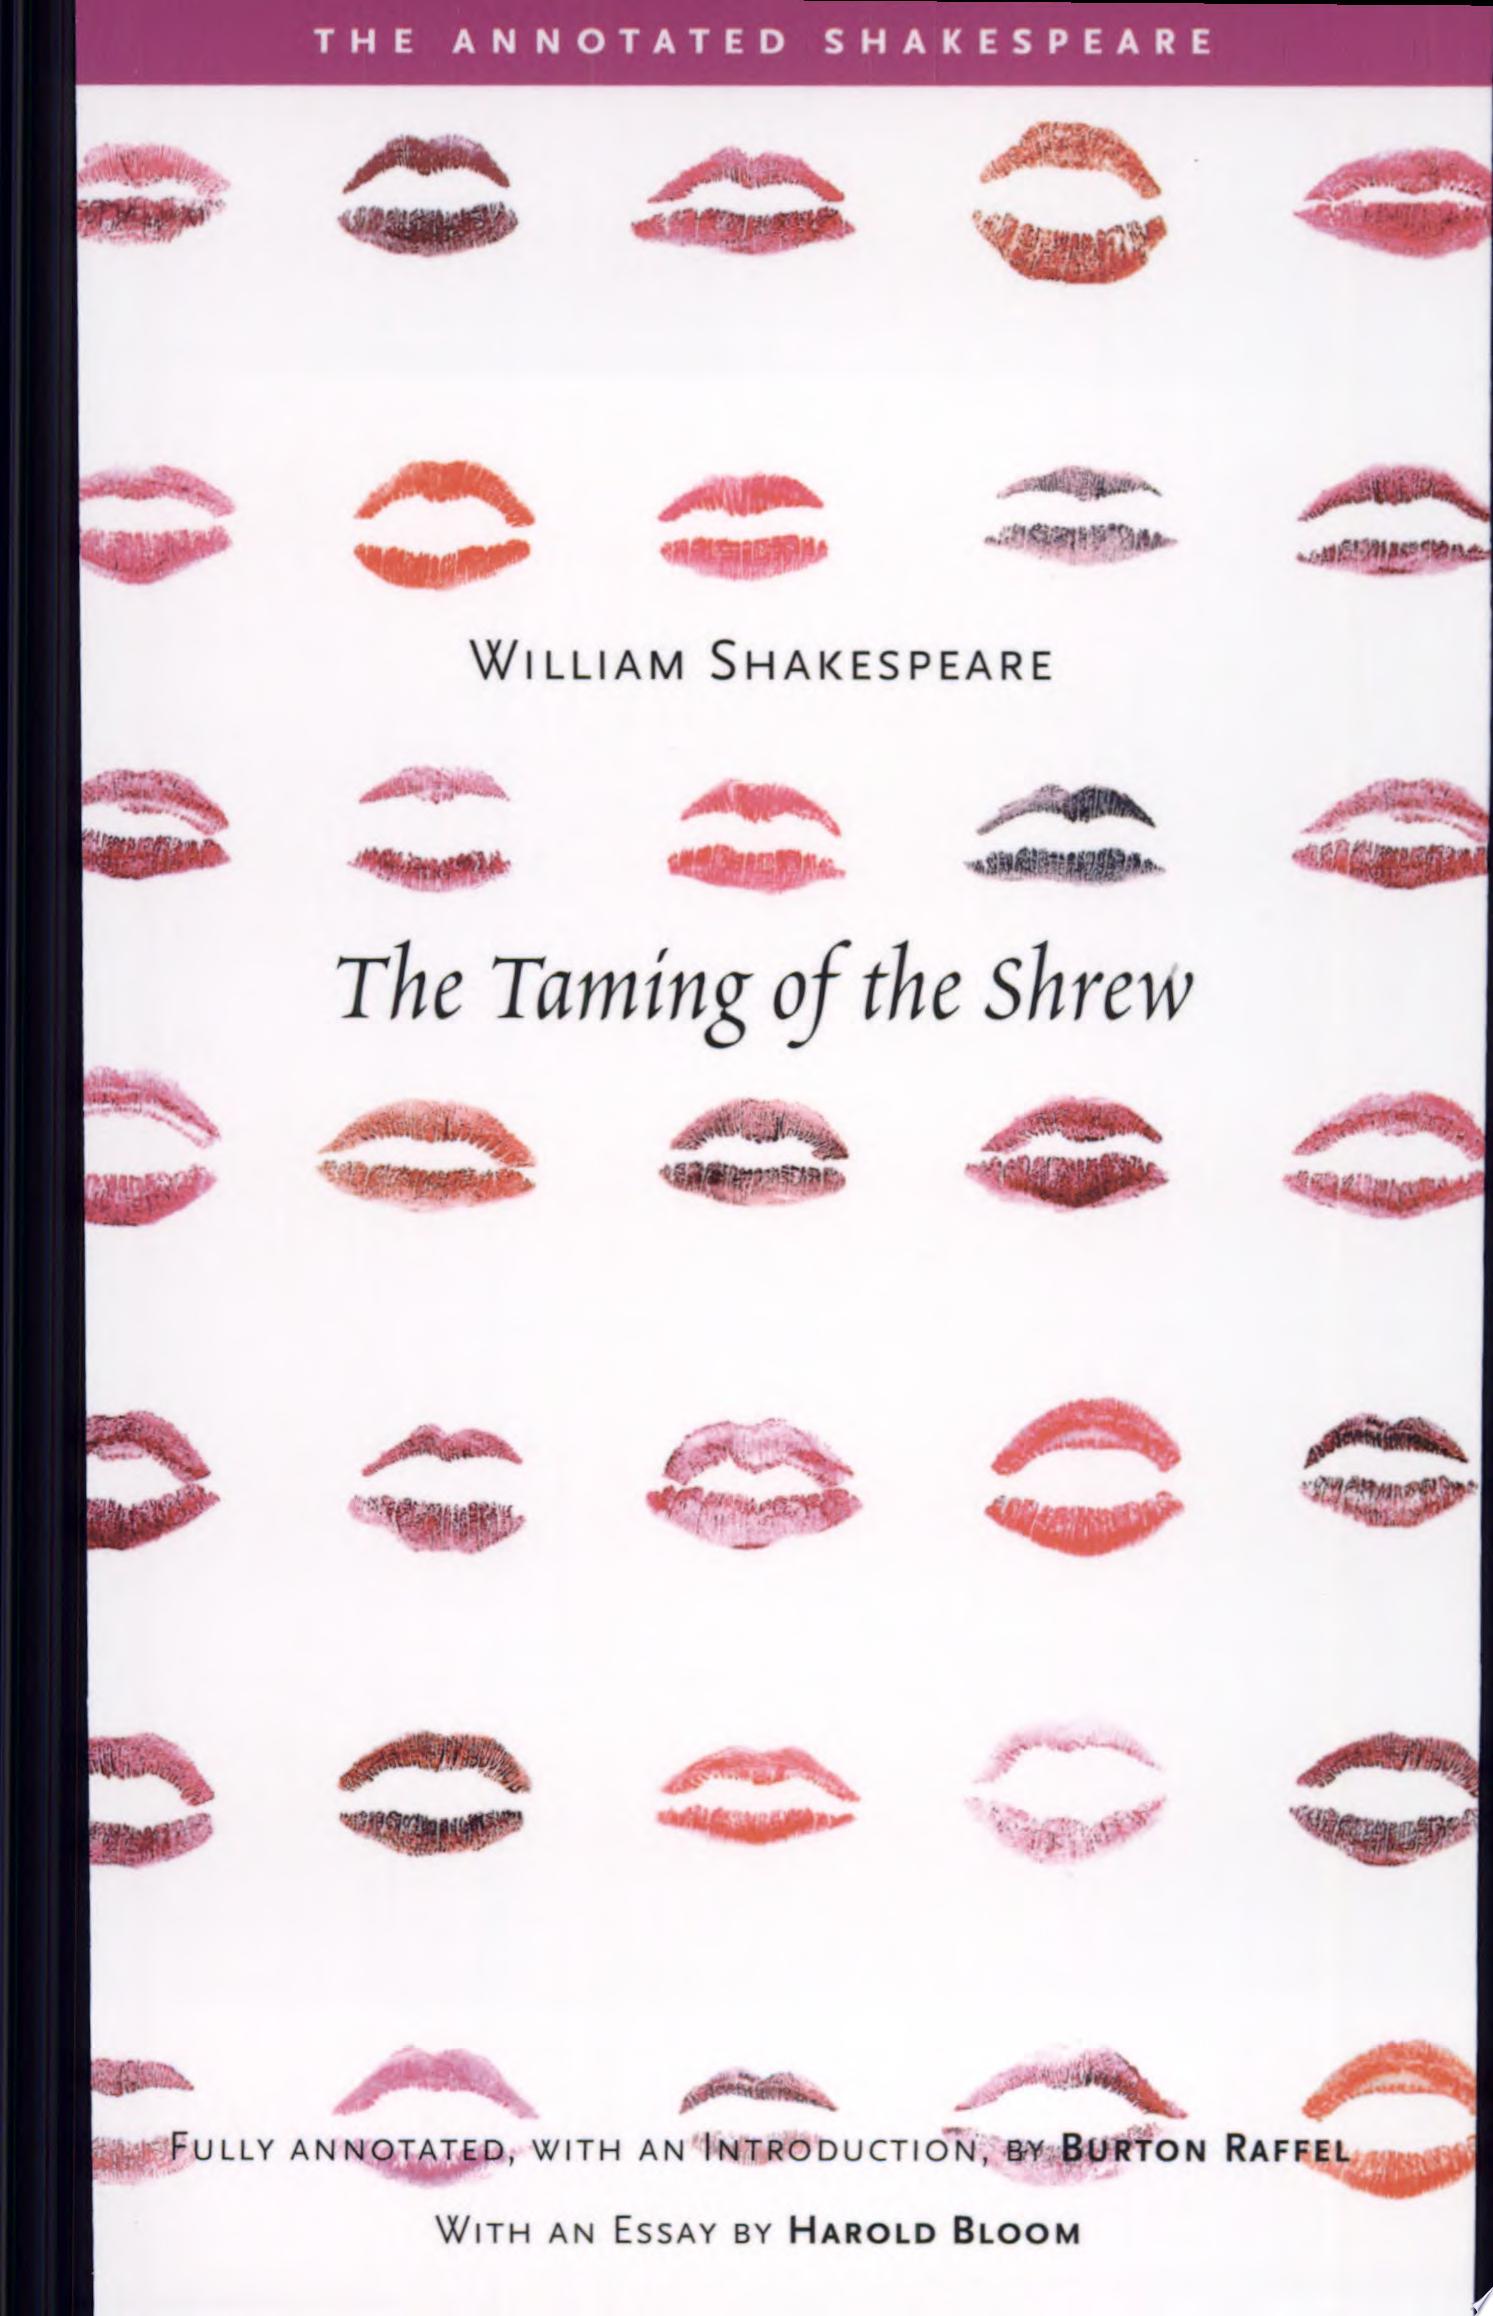 Image for "The Taming of the Shrew"